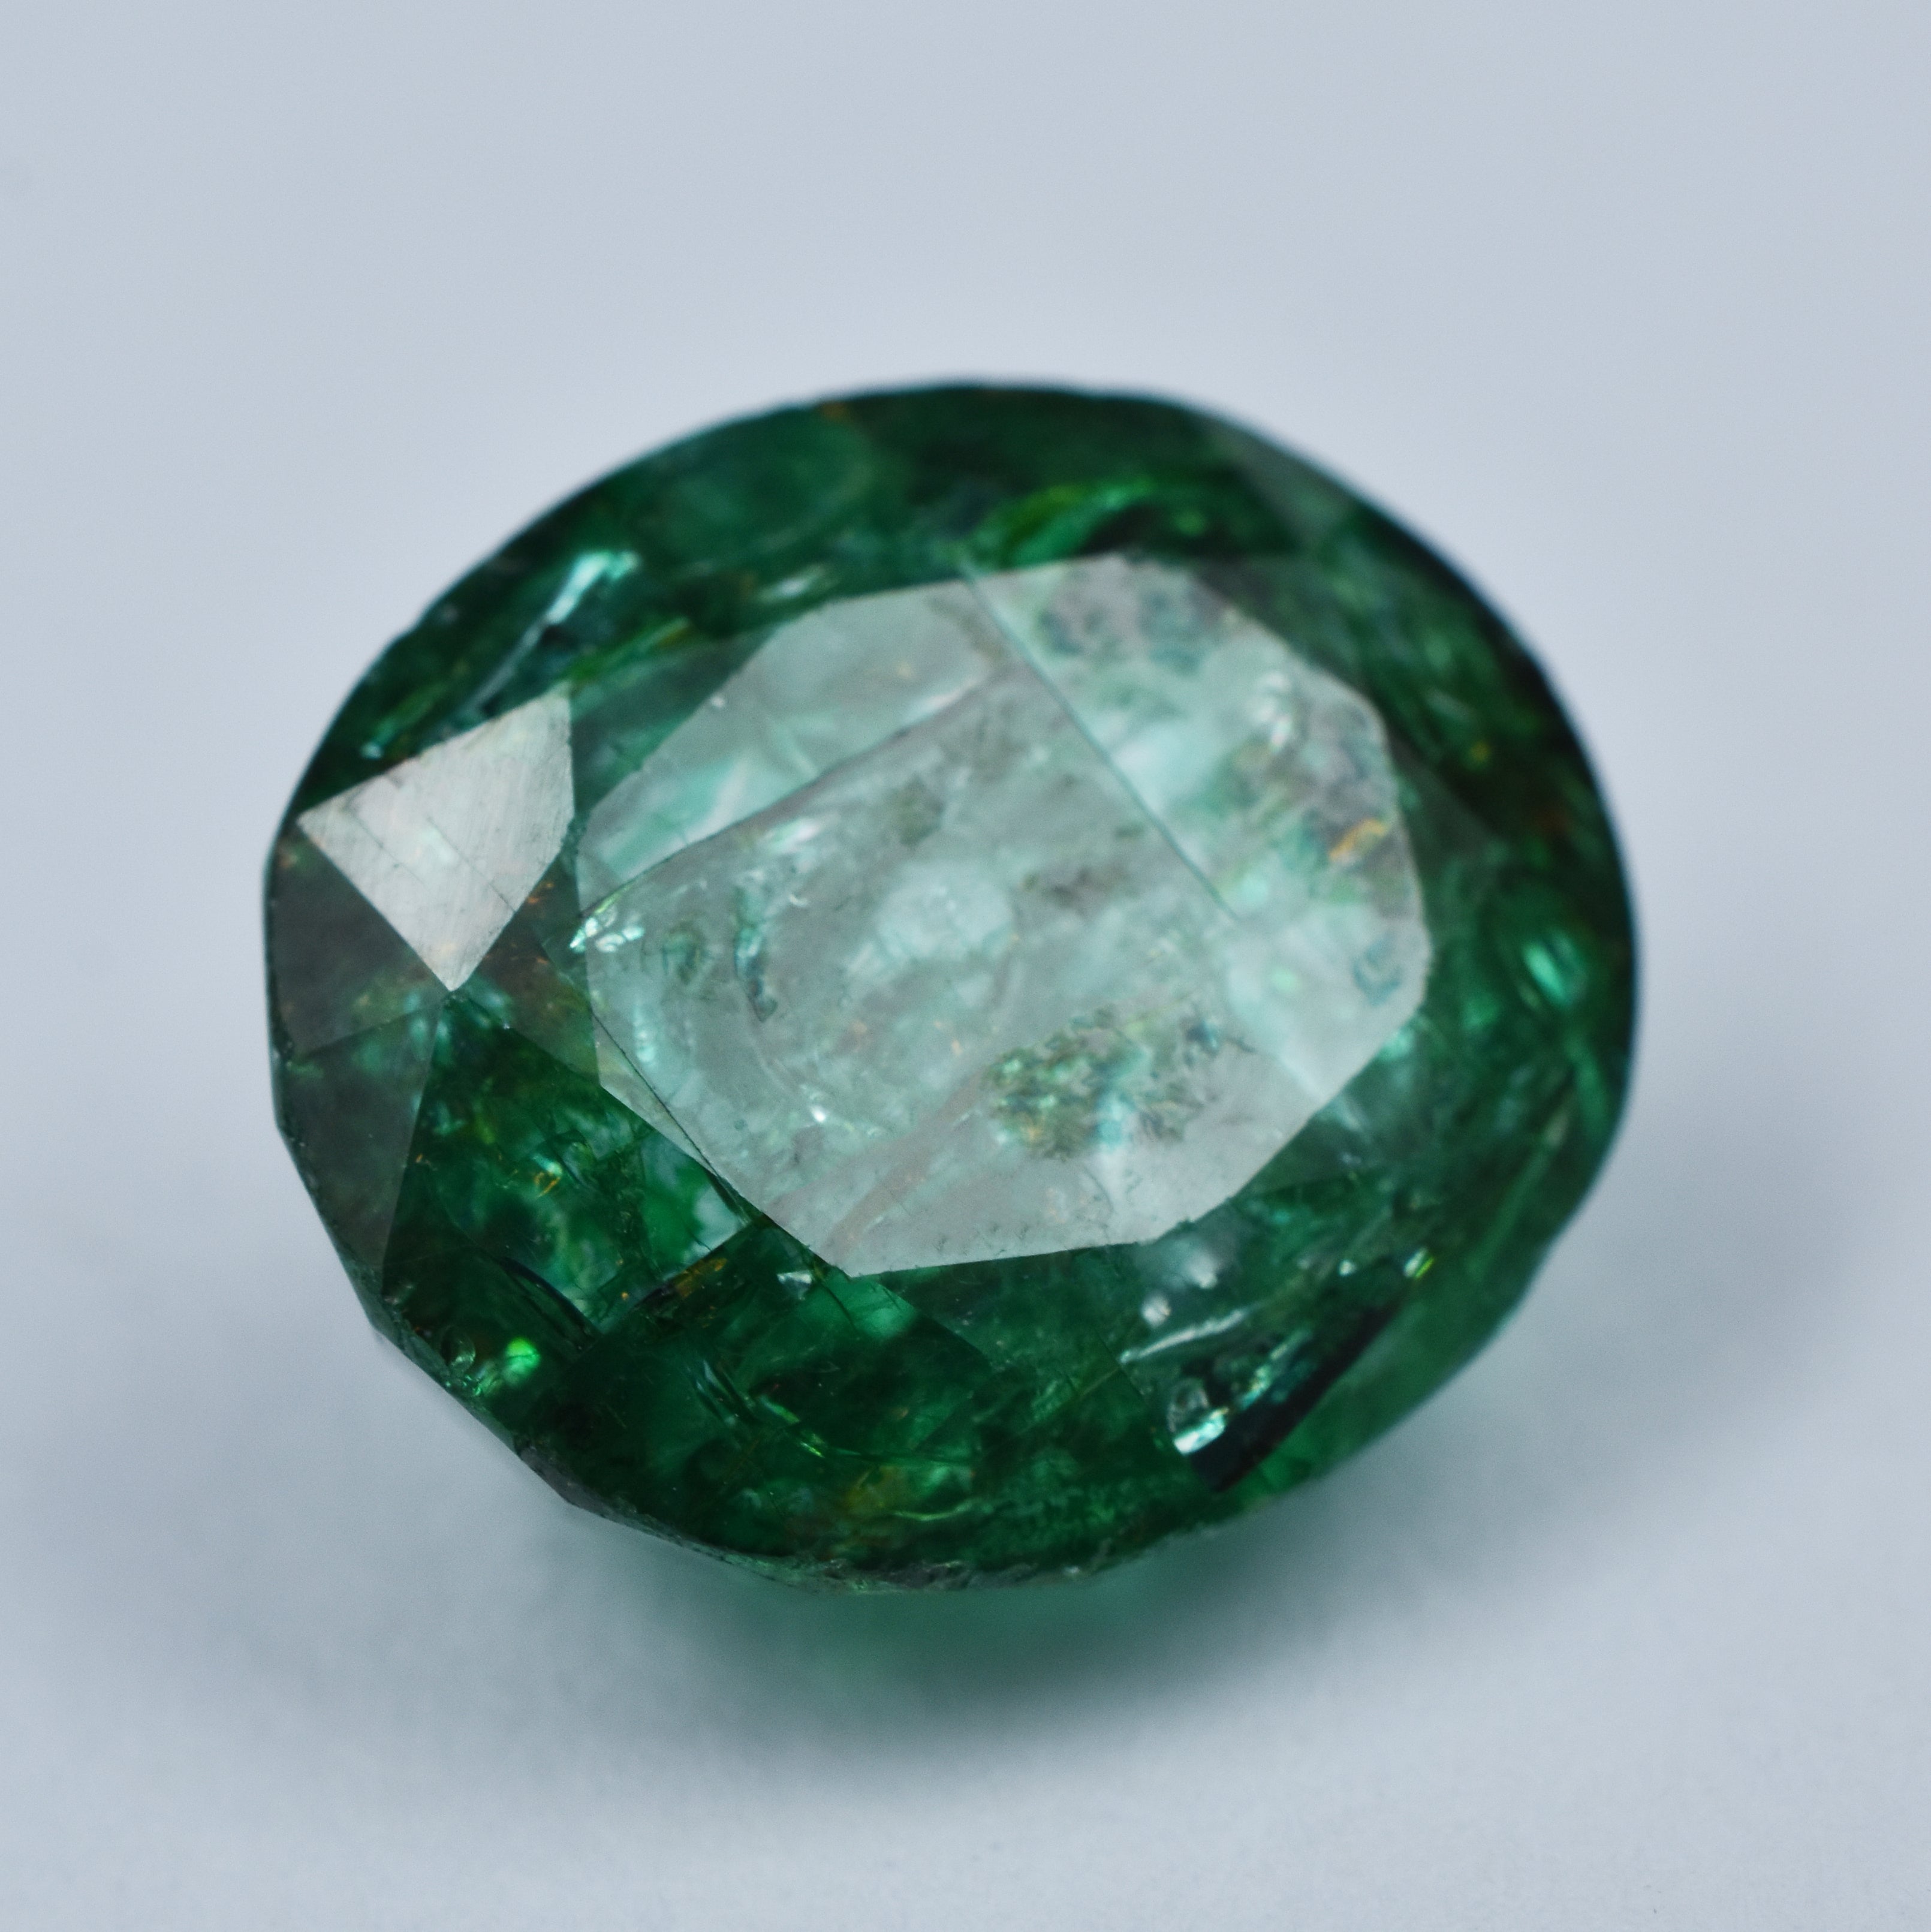 Glorious Emerald Green 8.65 Carat Green Emerald Oval Cut Natural CERTIFIED Loose Gemstone | Free Delivery Free Gift | Best Offer With Best Price